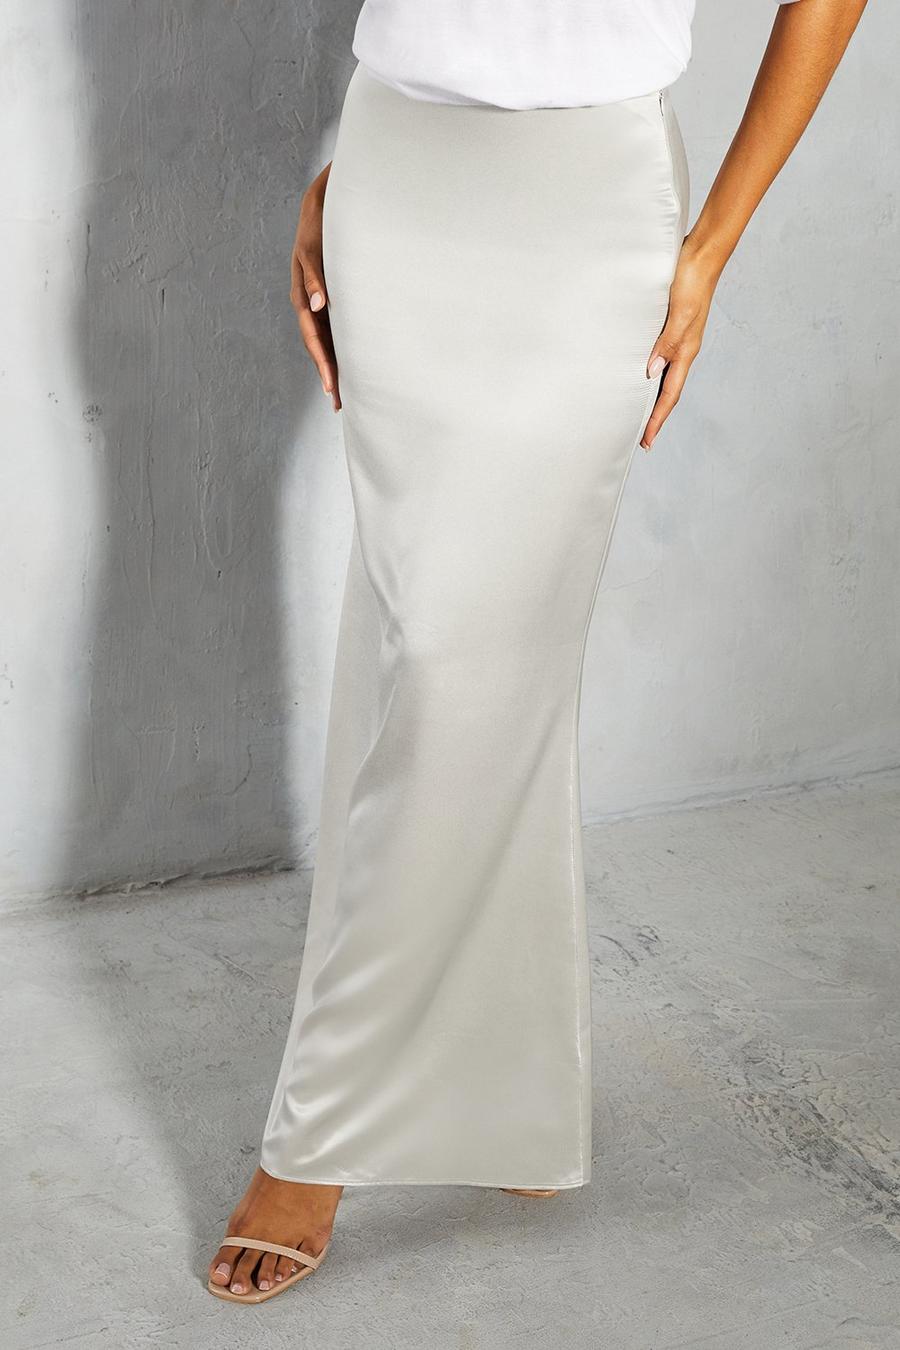 Silver Metallic Satin High Waisted Fishtail Maxi Skirt  image number 1